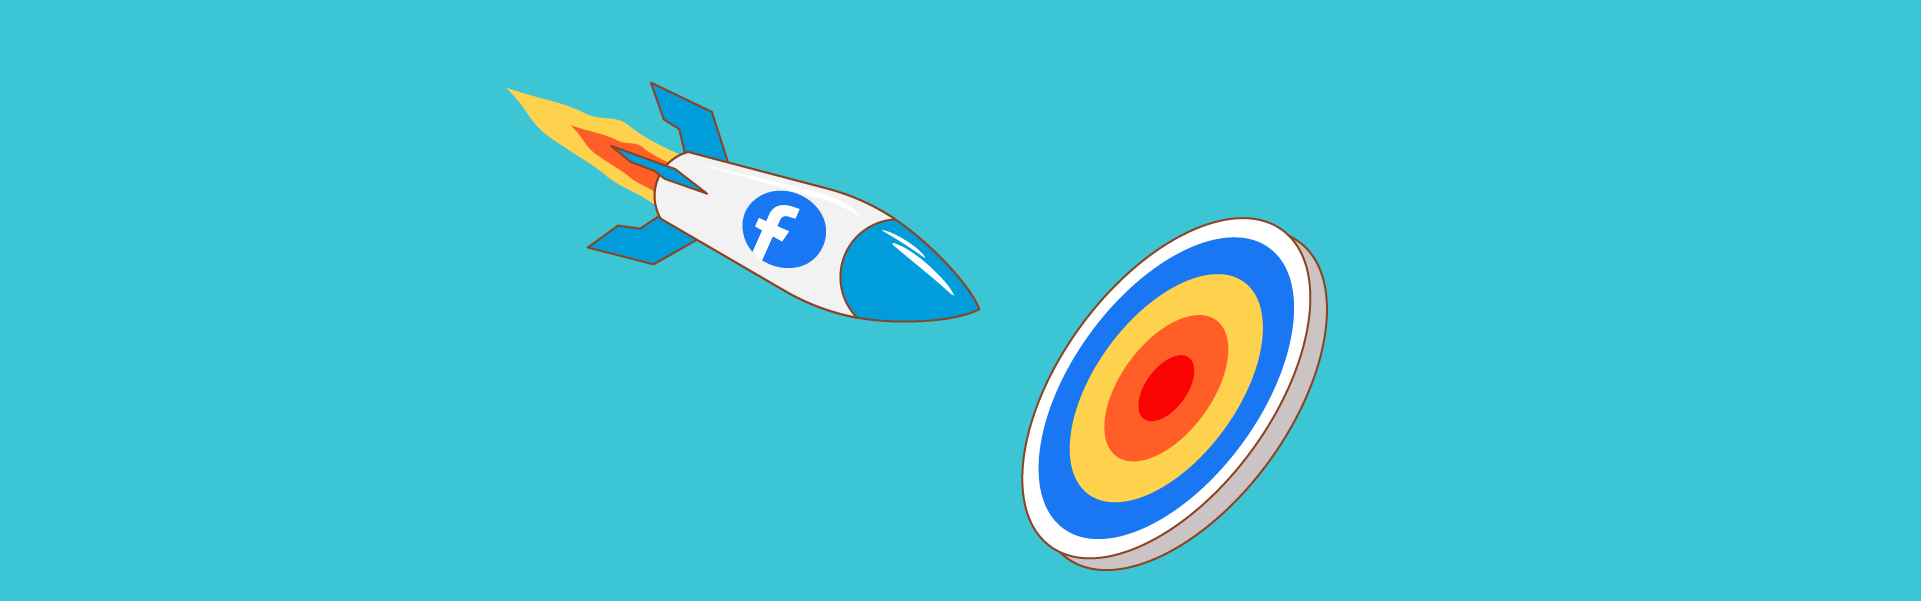 A Quick Guide on How to Create Facebook Ads That Work